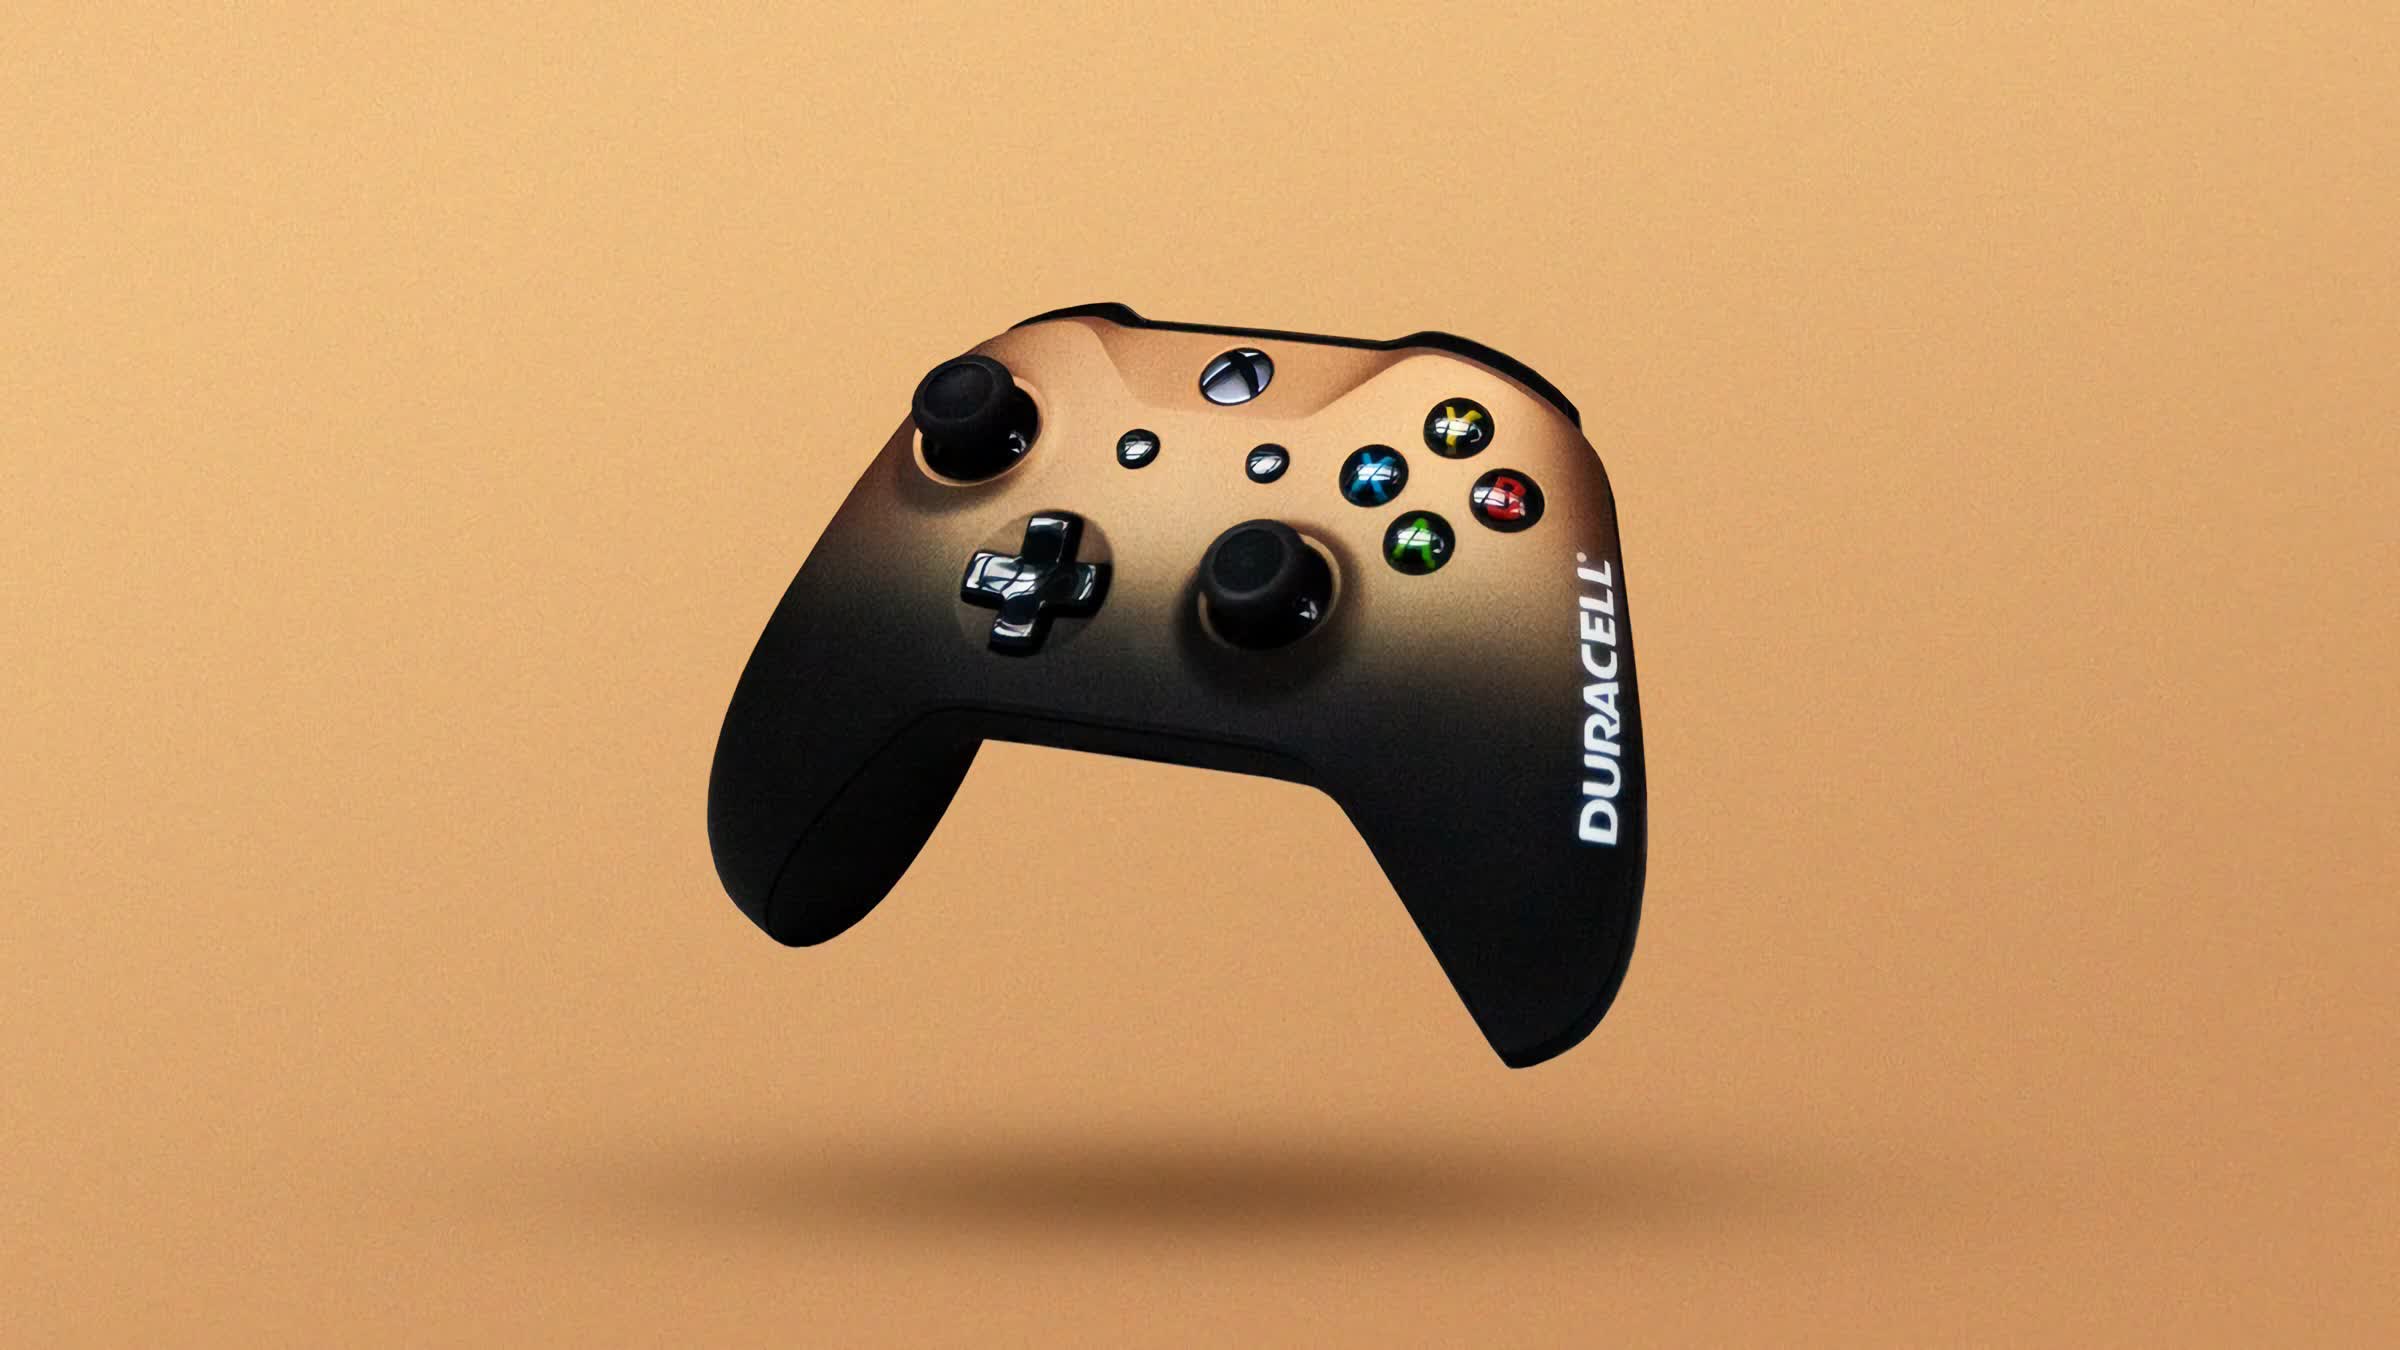 Xbox controllers still use AA batteries because of a long-standing agreement with Duracell